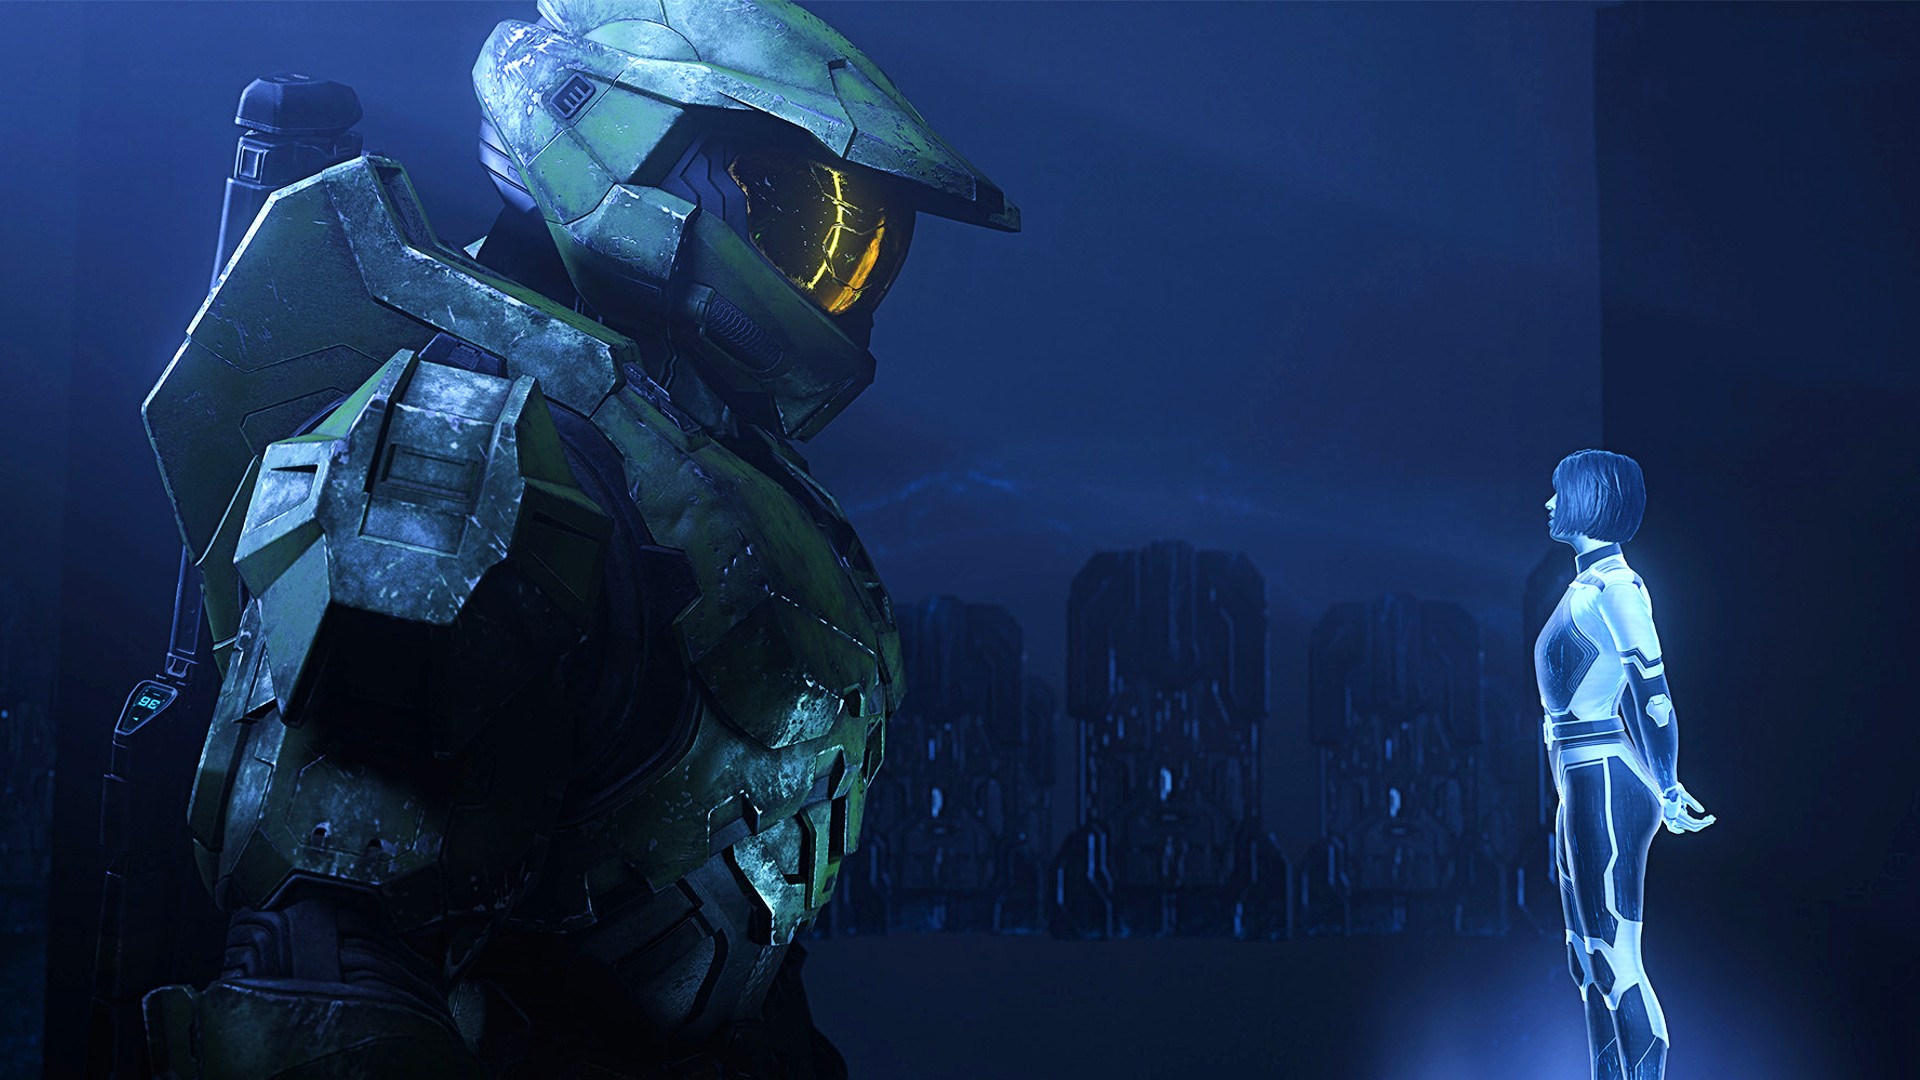 Halo episode one is free on YouTube, but not for everyone